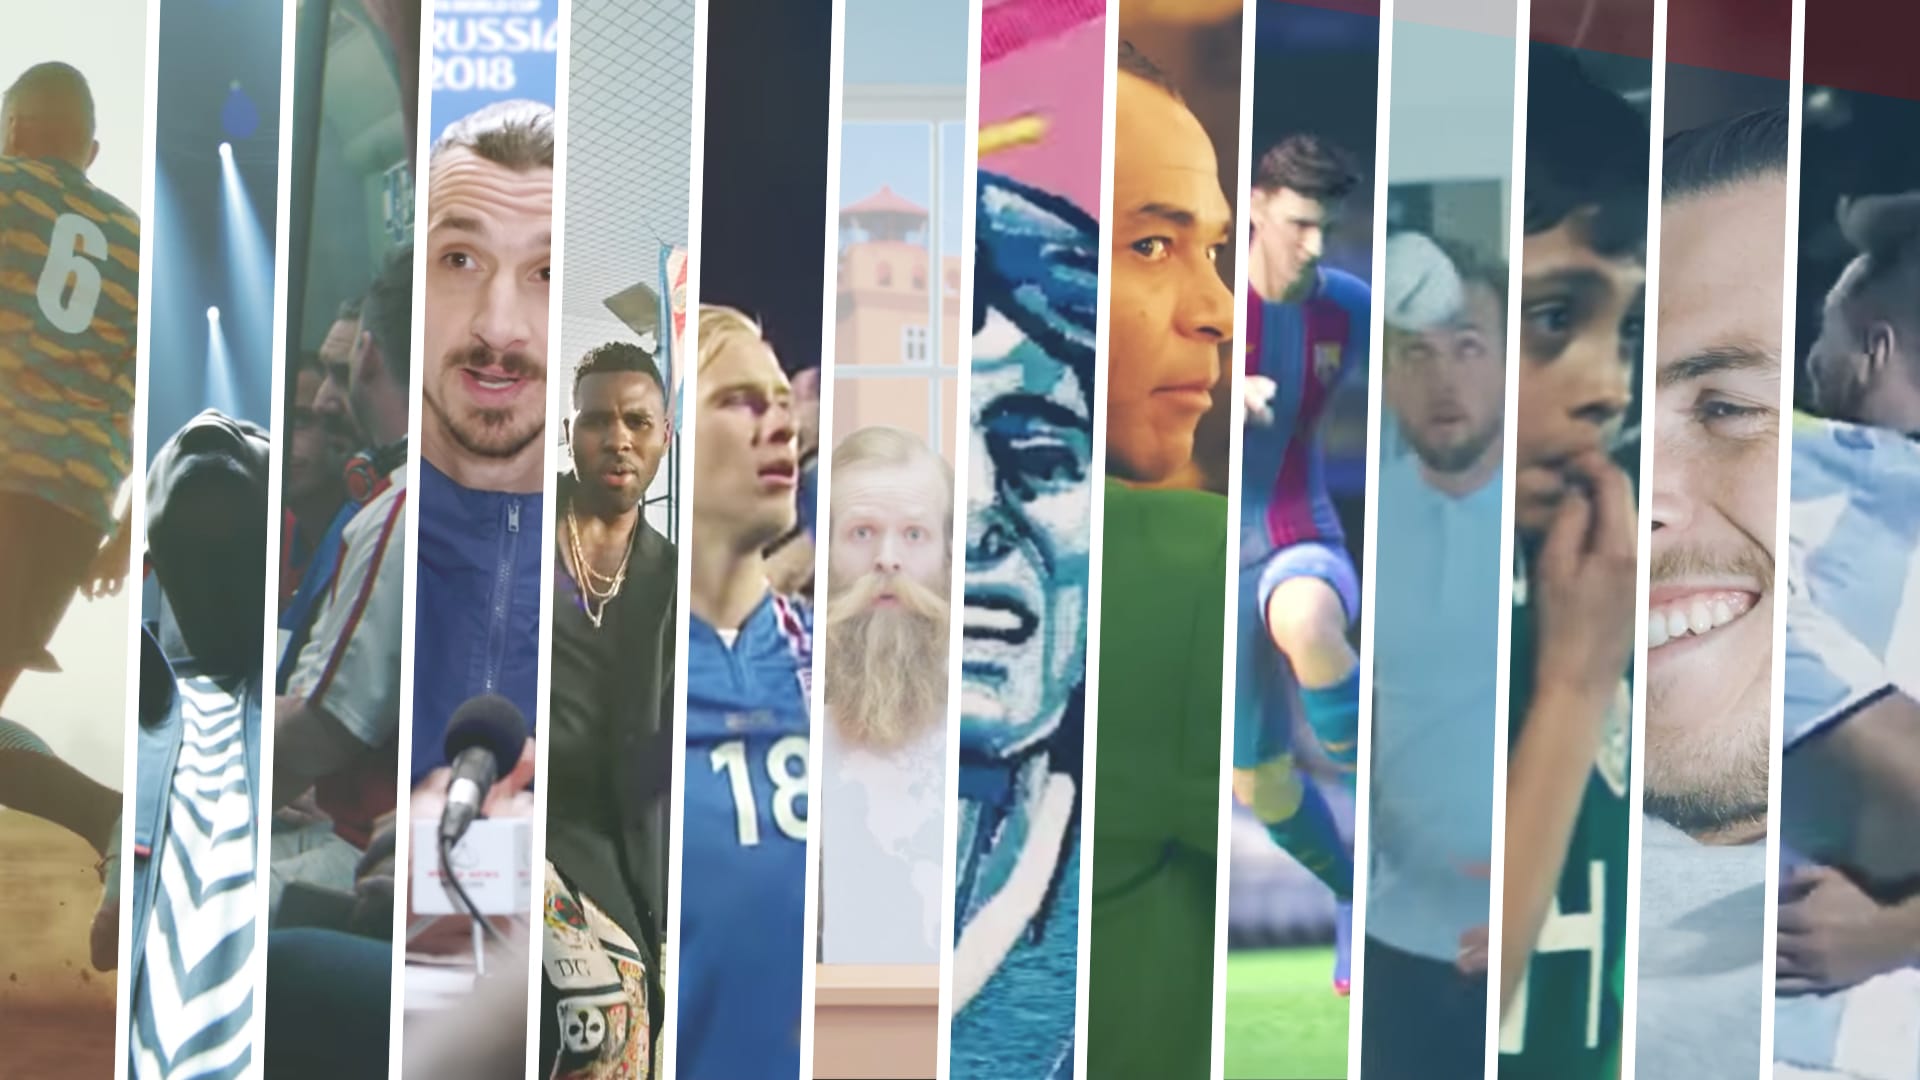 Kick off the World Cup with Nike, Adidas, Budweiser, and more